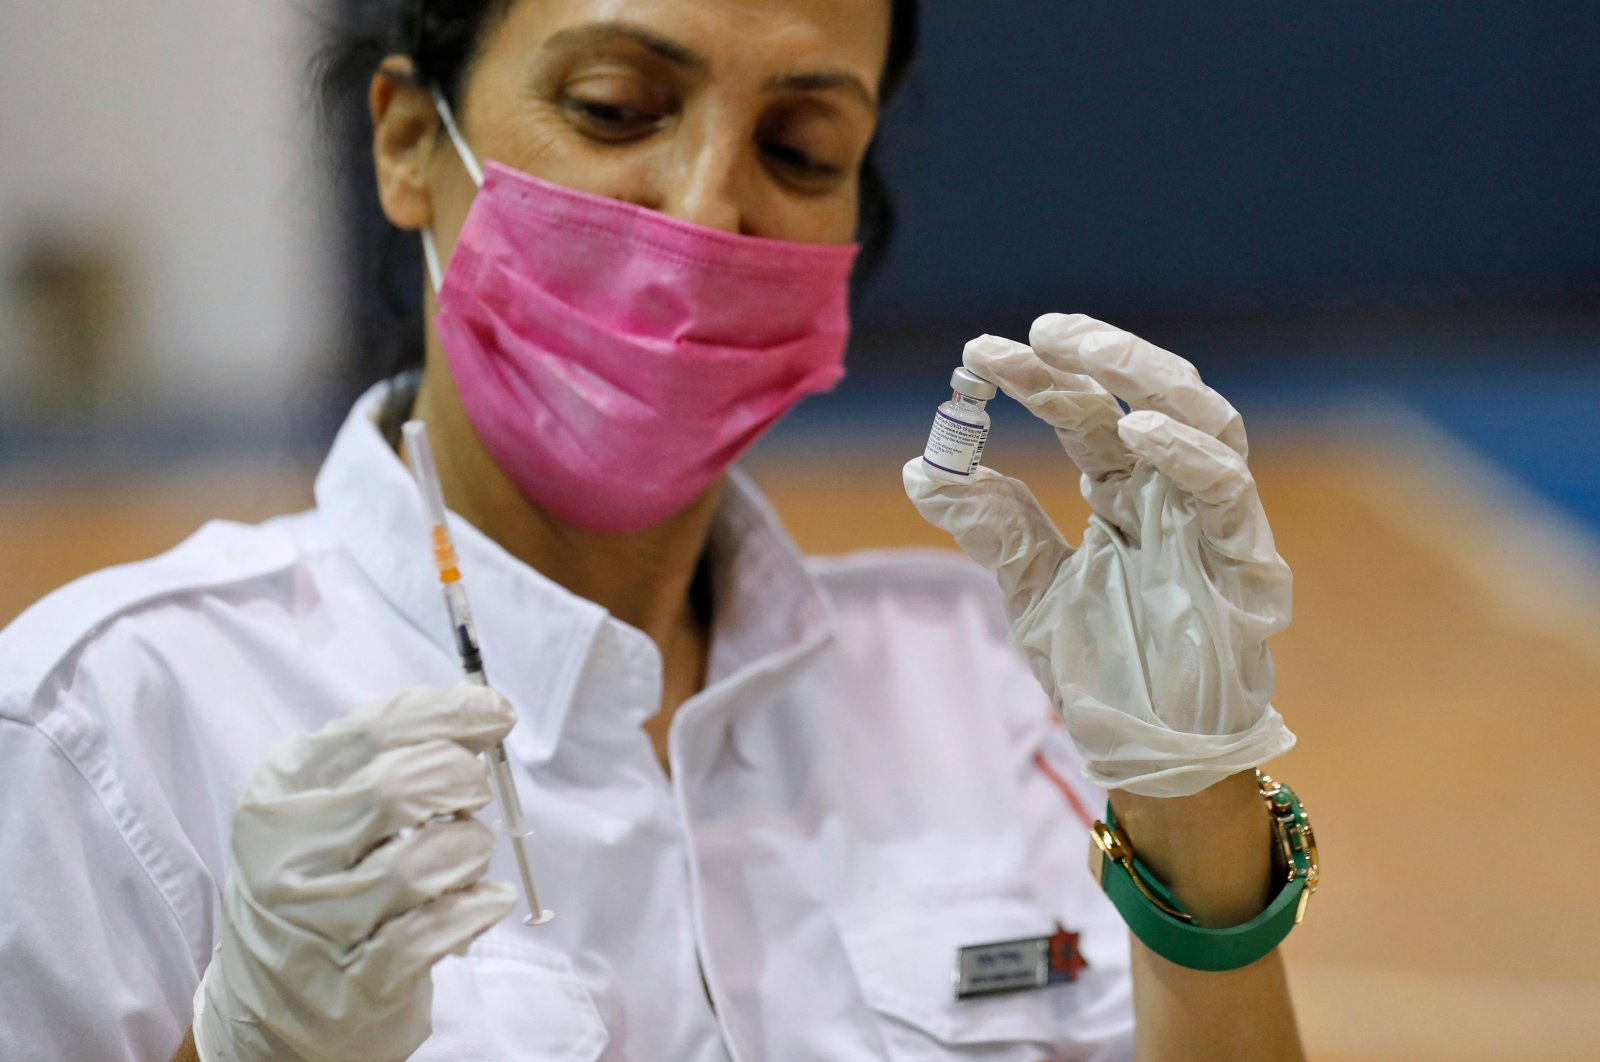 A paramedic with Israel's Magen David Adom medical service prepares to administer the third shot of the Pfizer-BioNTech COVID-19 vaccine, Holon, Israel, Aug. 24, 2021. (AFP Photo)